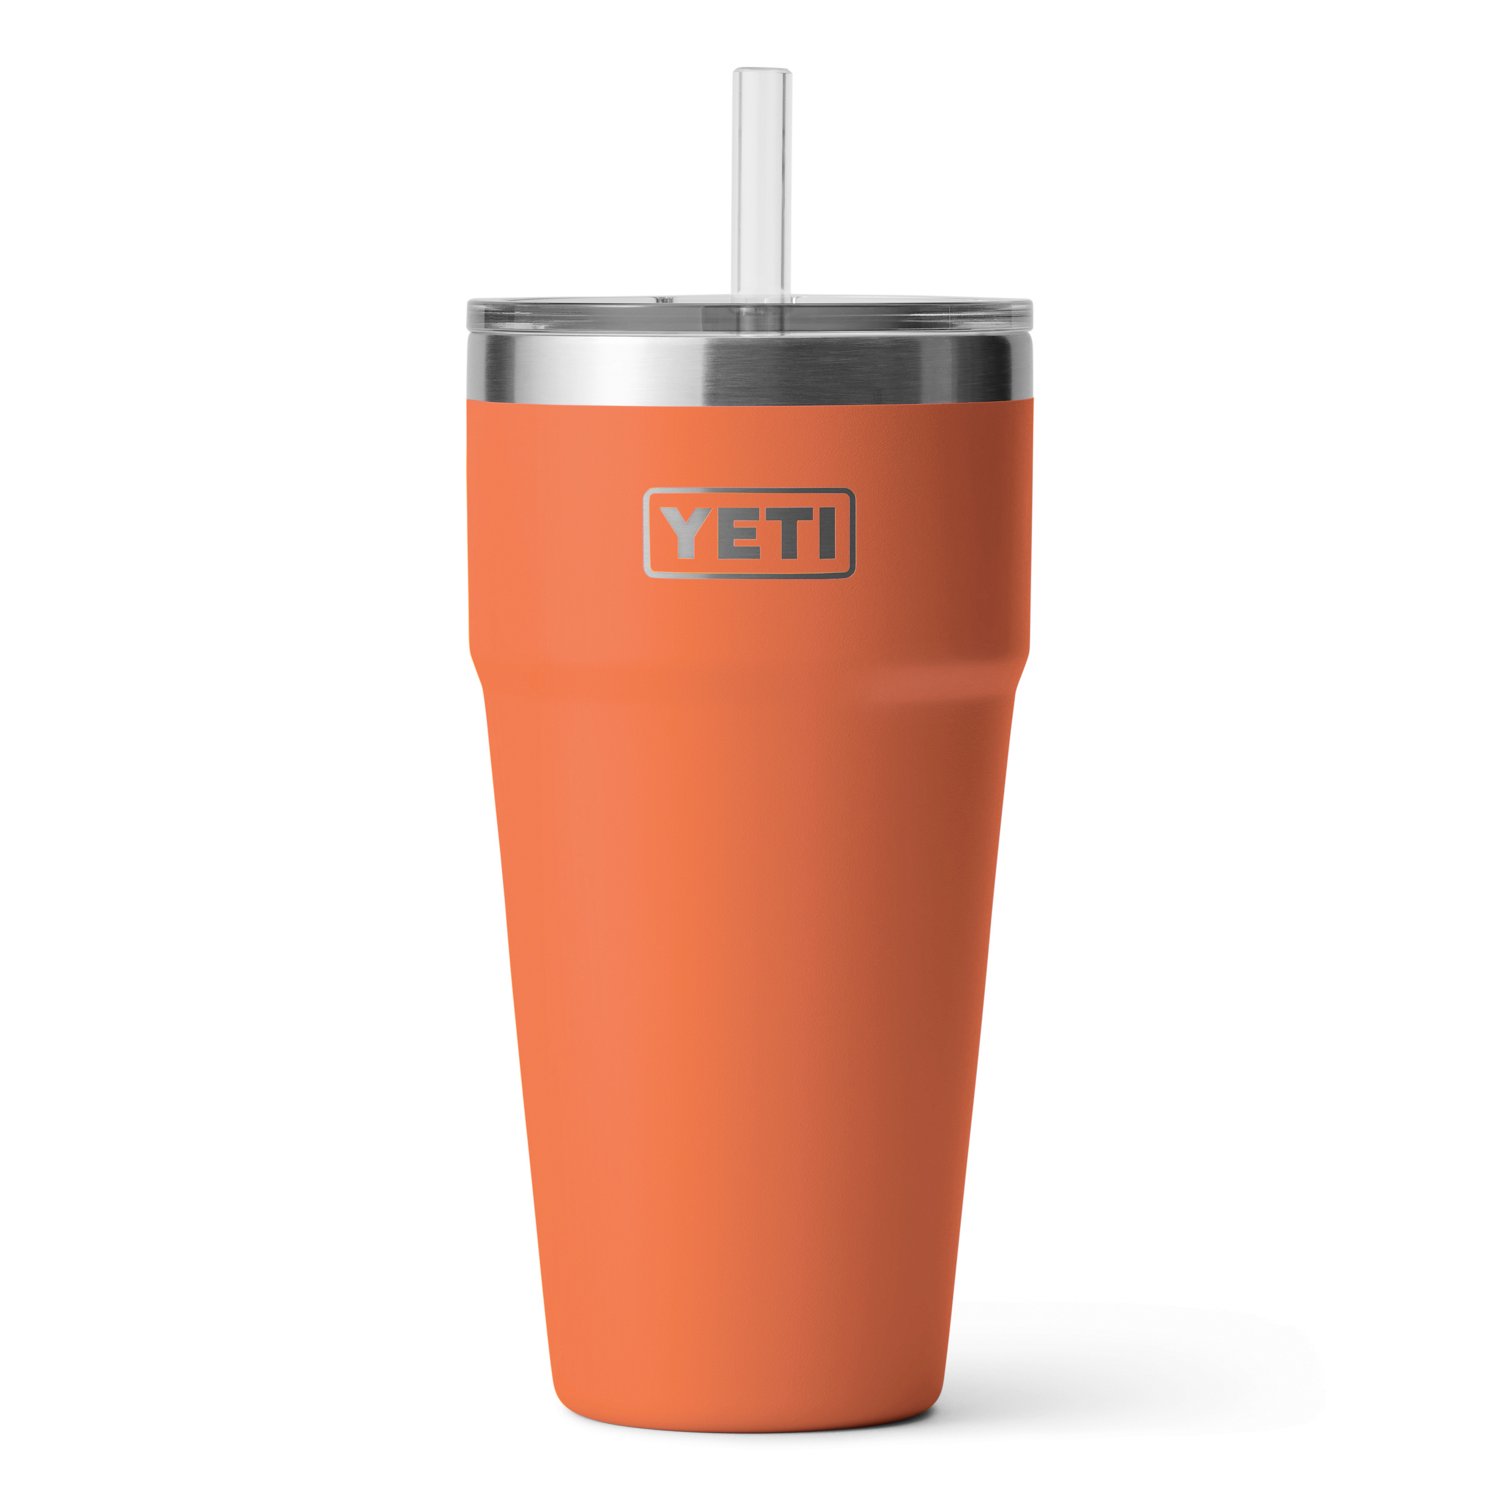 https://academy.scene7.com/is/image/academy//drinkware/yeti-rambler-26-oz-stackable-cup-with-straw-lid-21071501411-orange/0b6924e73be0441092ced7bdb5248ab2